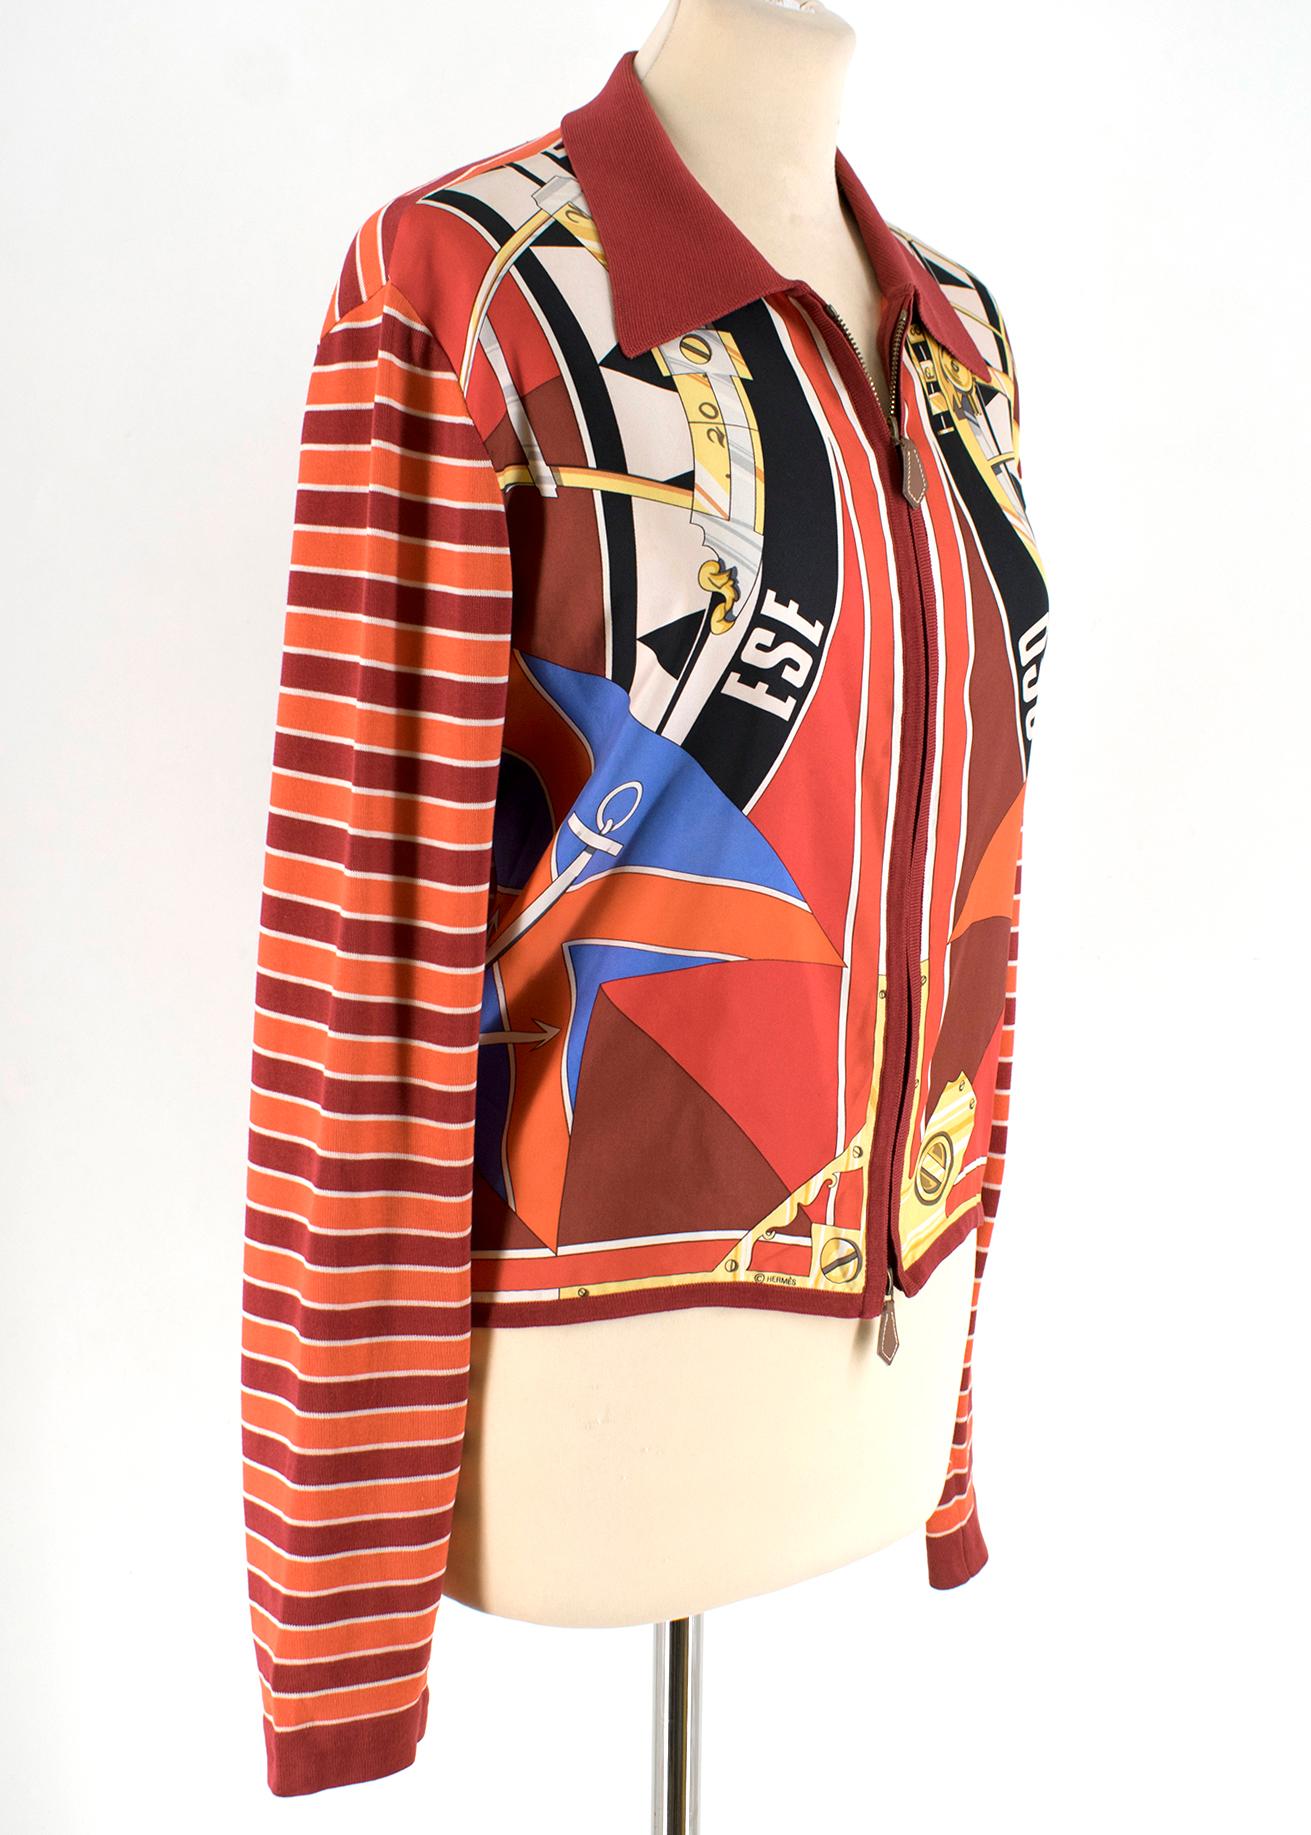 Hermes Red Pattern Zip Up Jacket

Double zip up jacket, with print design,
Long sleeves,
Stripe design along sleeves and rear, 
Front centre gold-tone full zip hardware, 
Point collar, 
Silk pattern on the front of jacket,
Lightweight 

Please note,